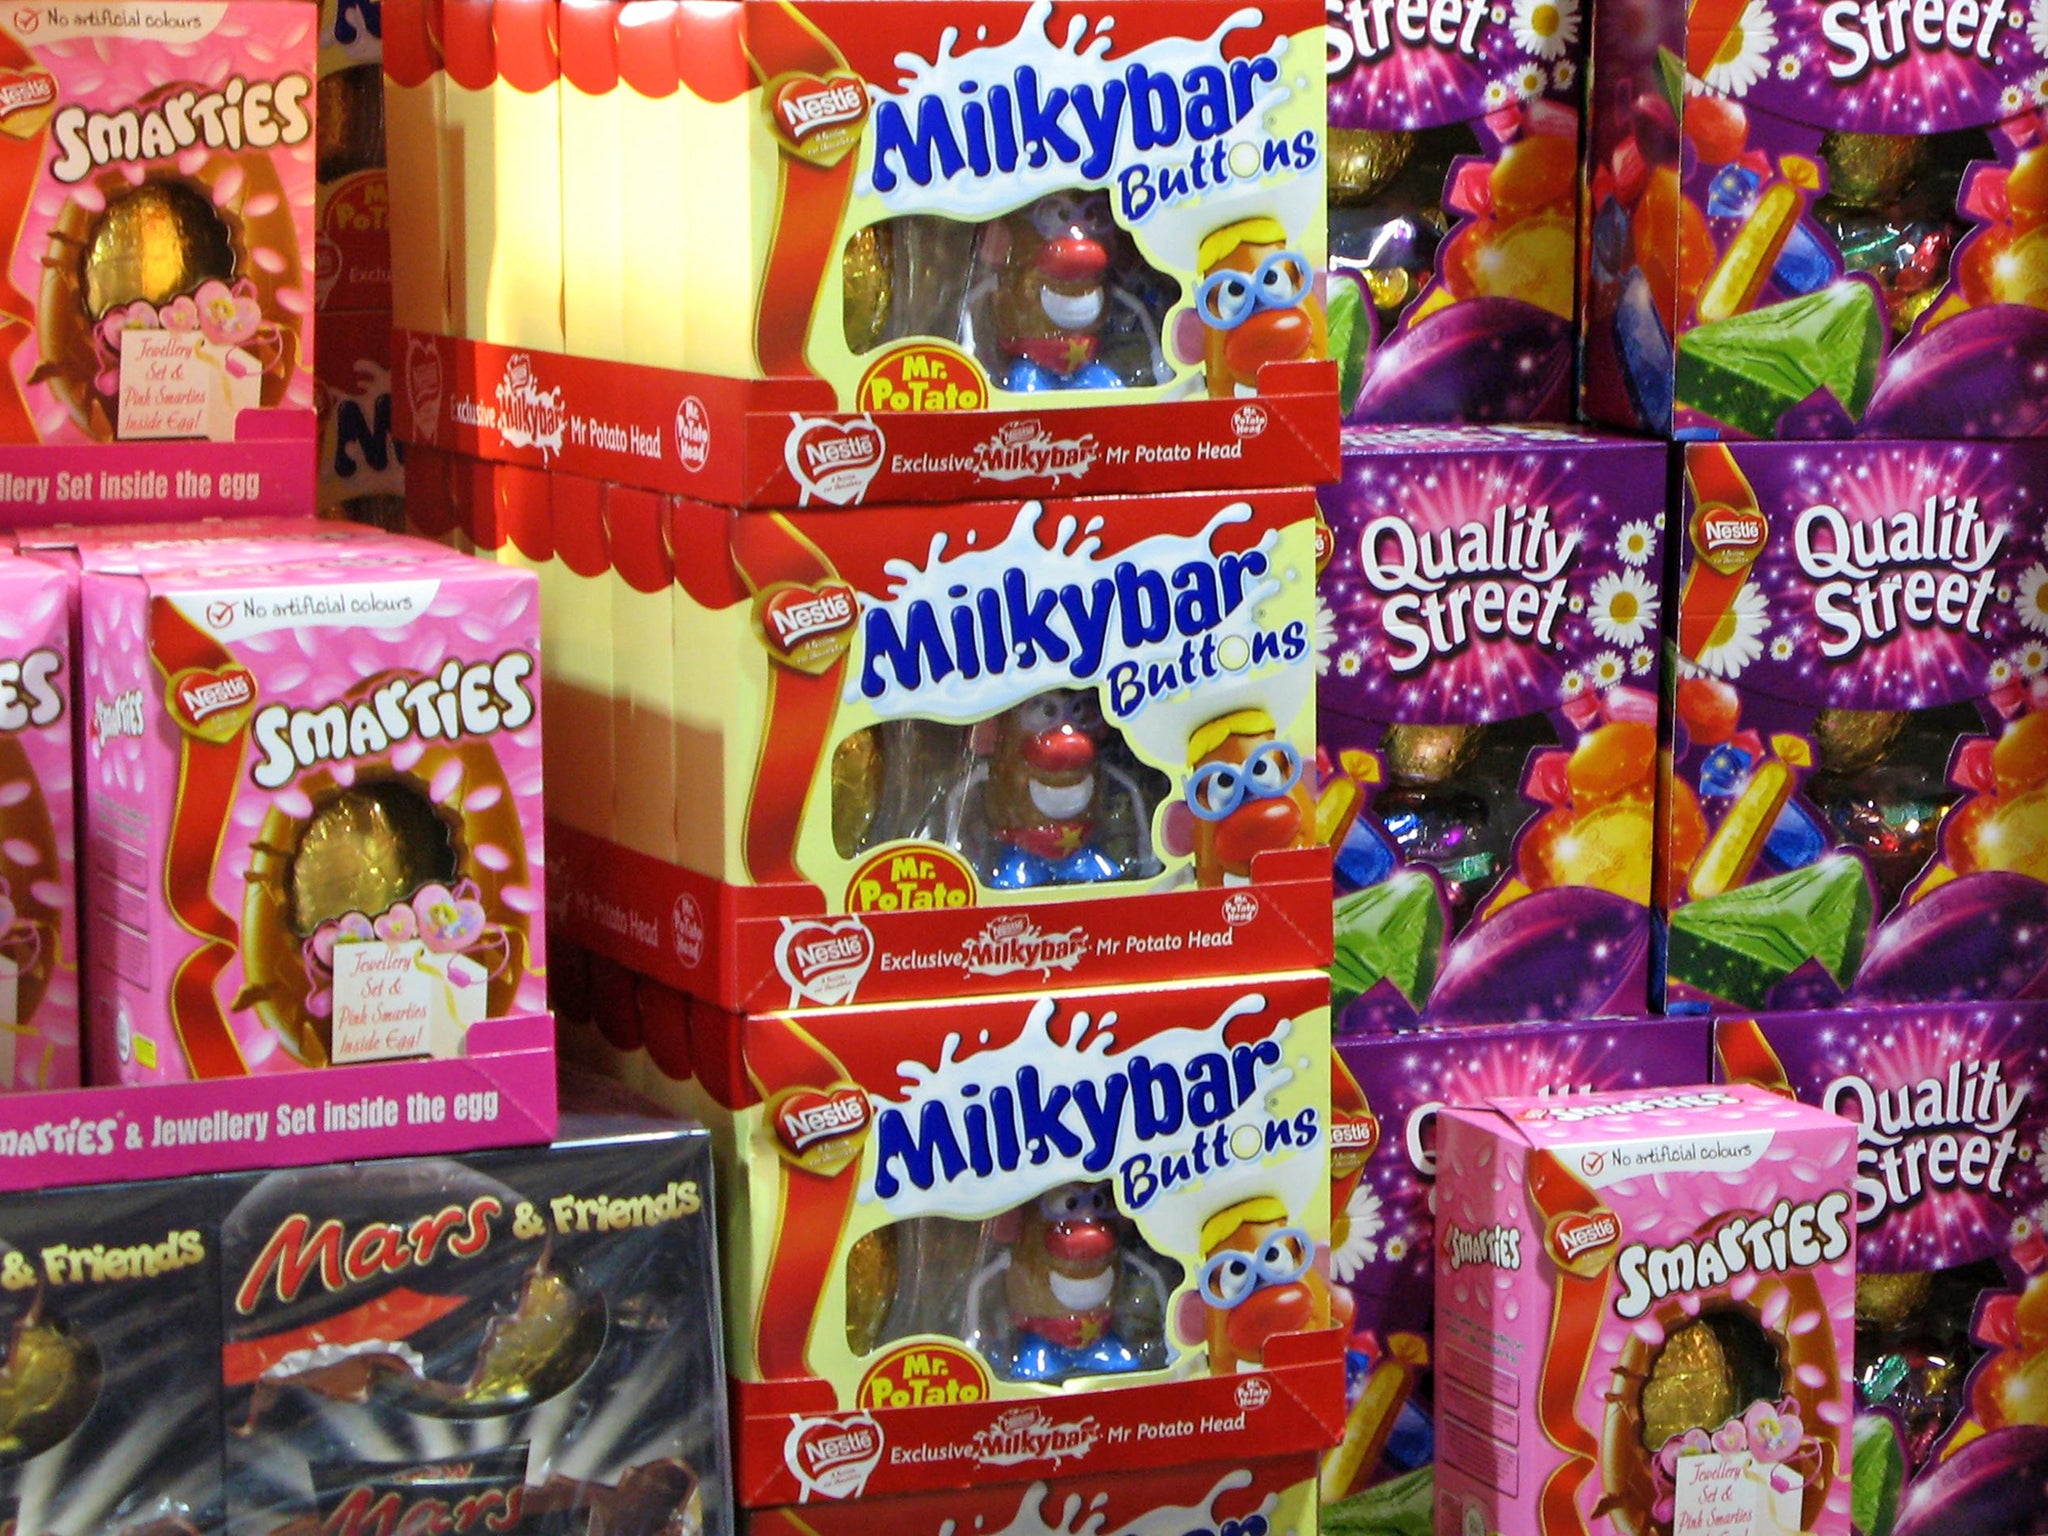 The ‘excess packaging’ used in Easter eggs has come under fire in a new report